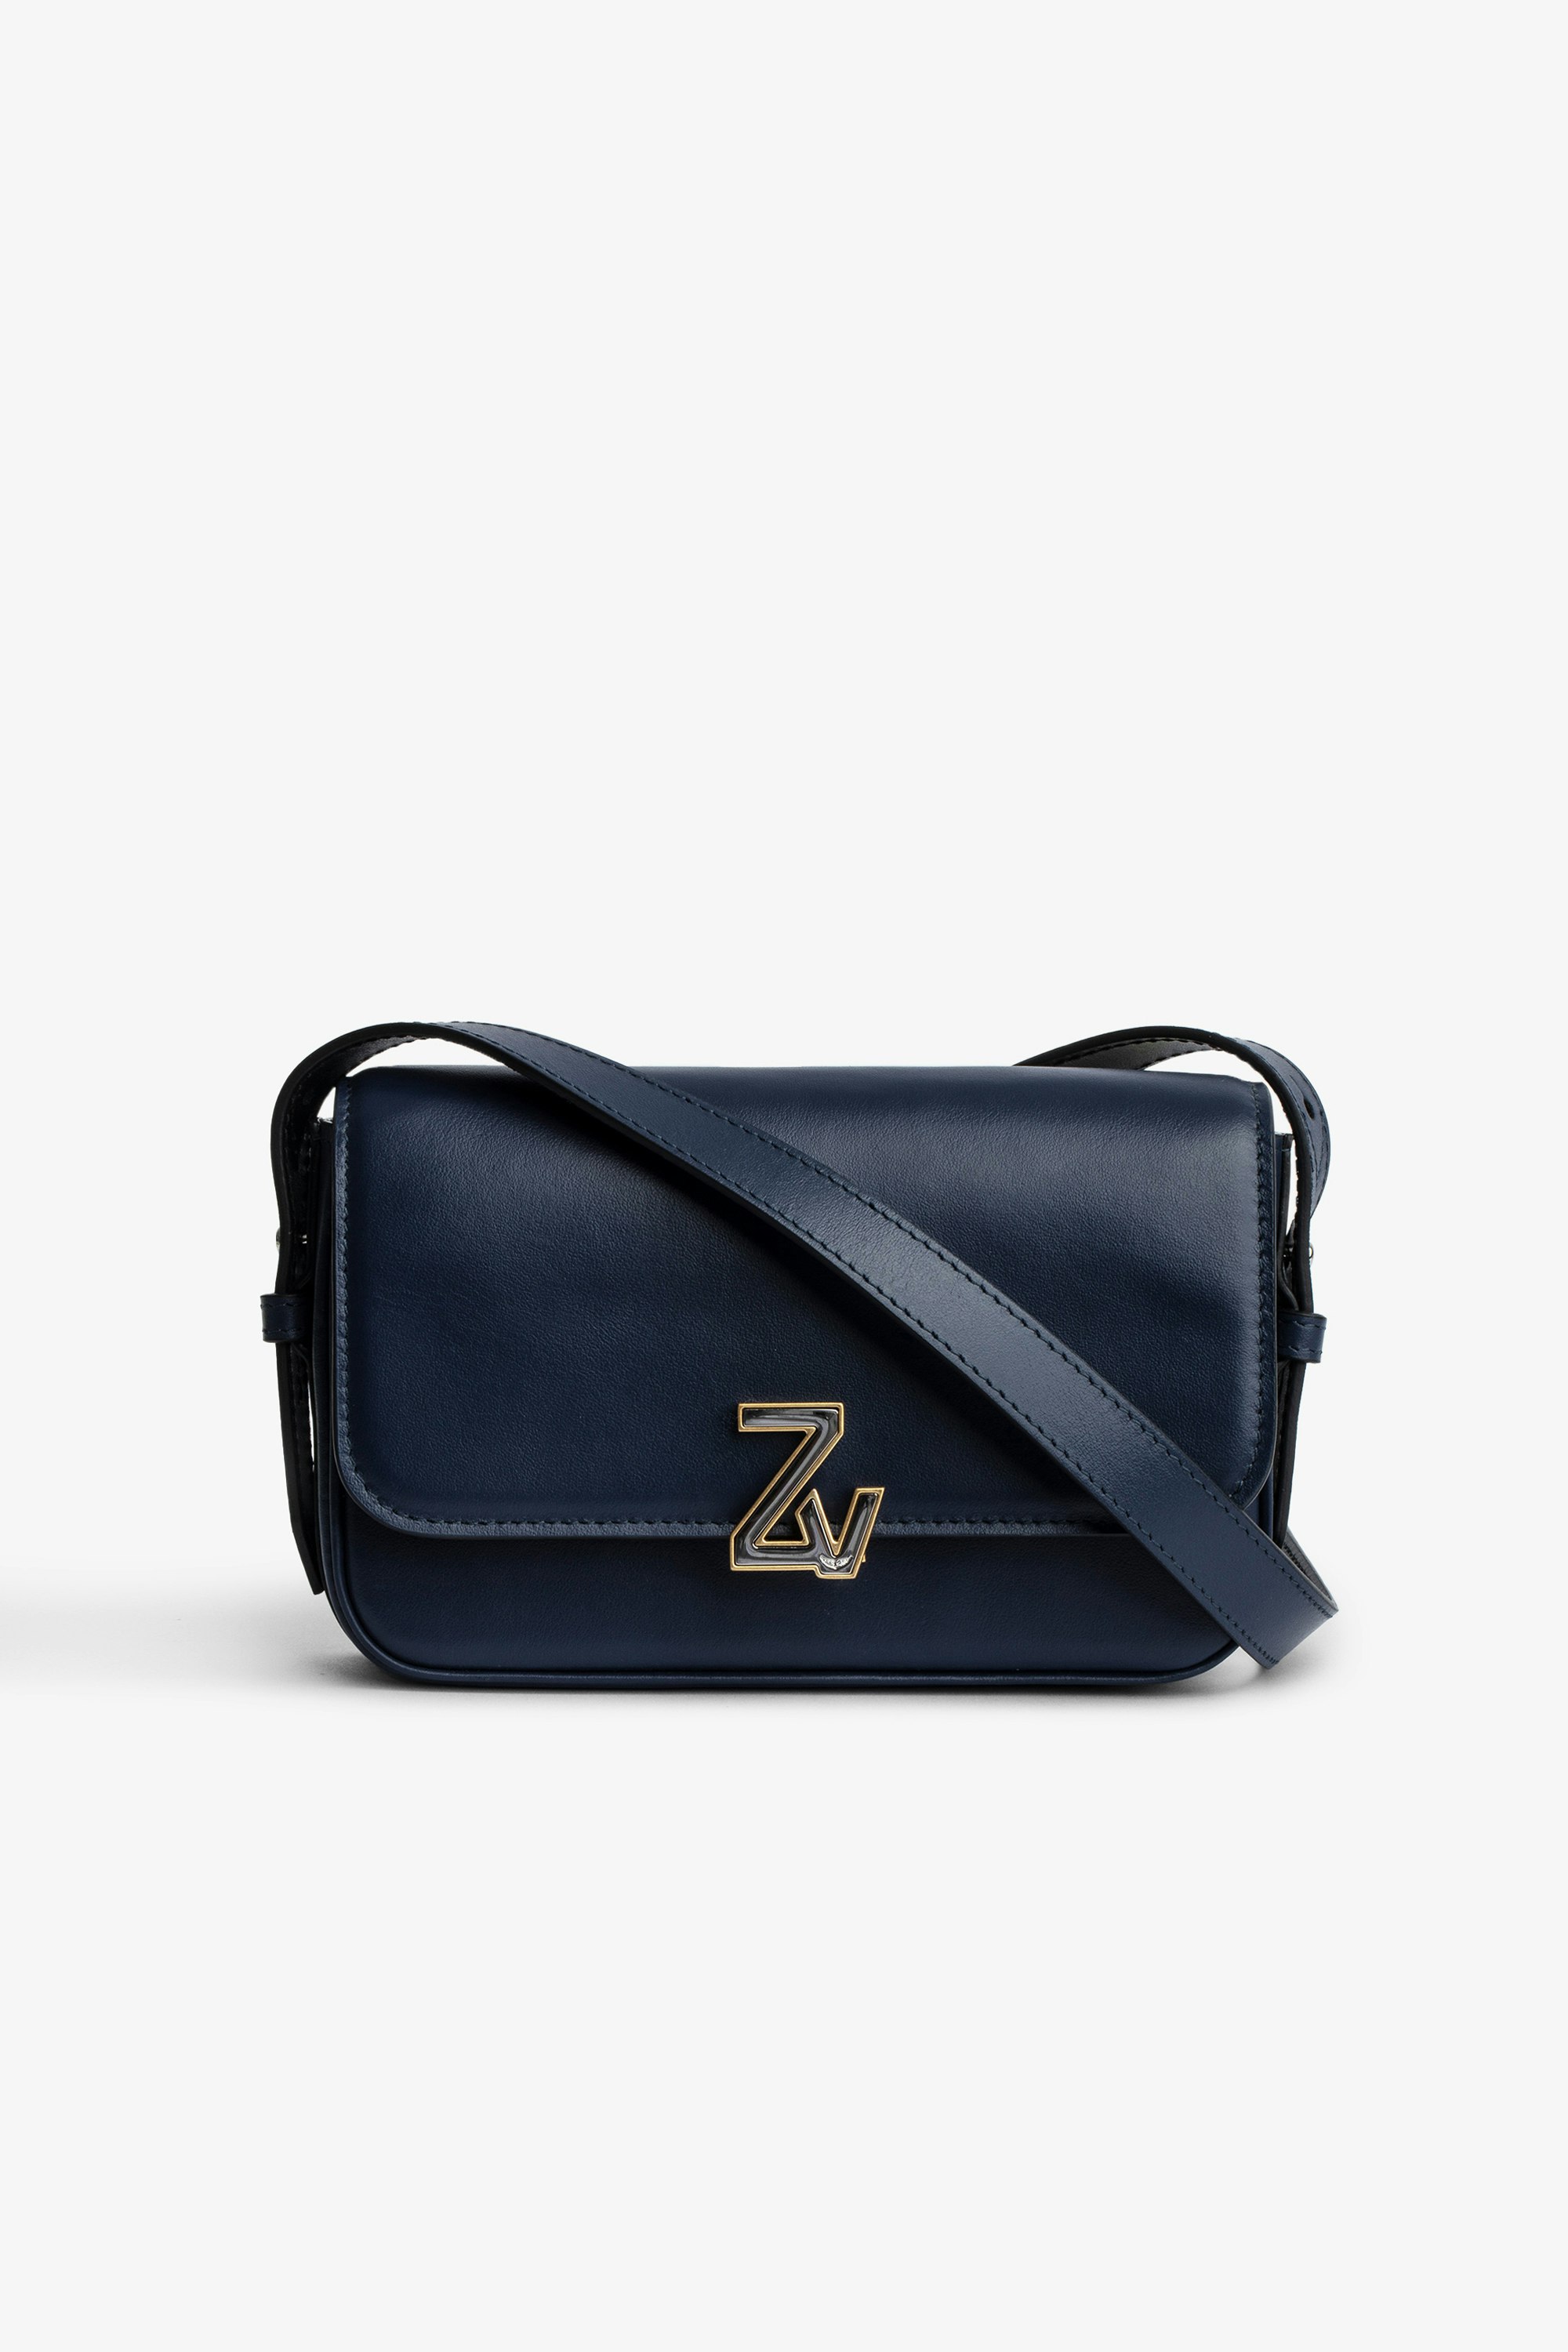 ZV Initiale Le Mini バッグ Women’s ZV Initiale Le Mini bag in navy blue smooth leather